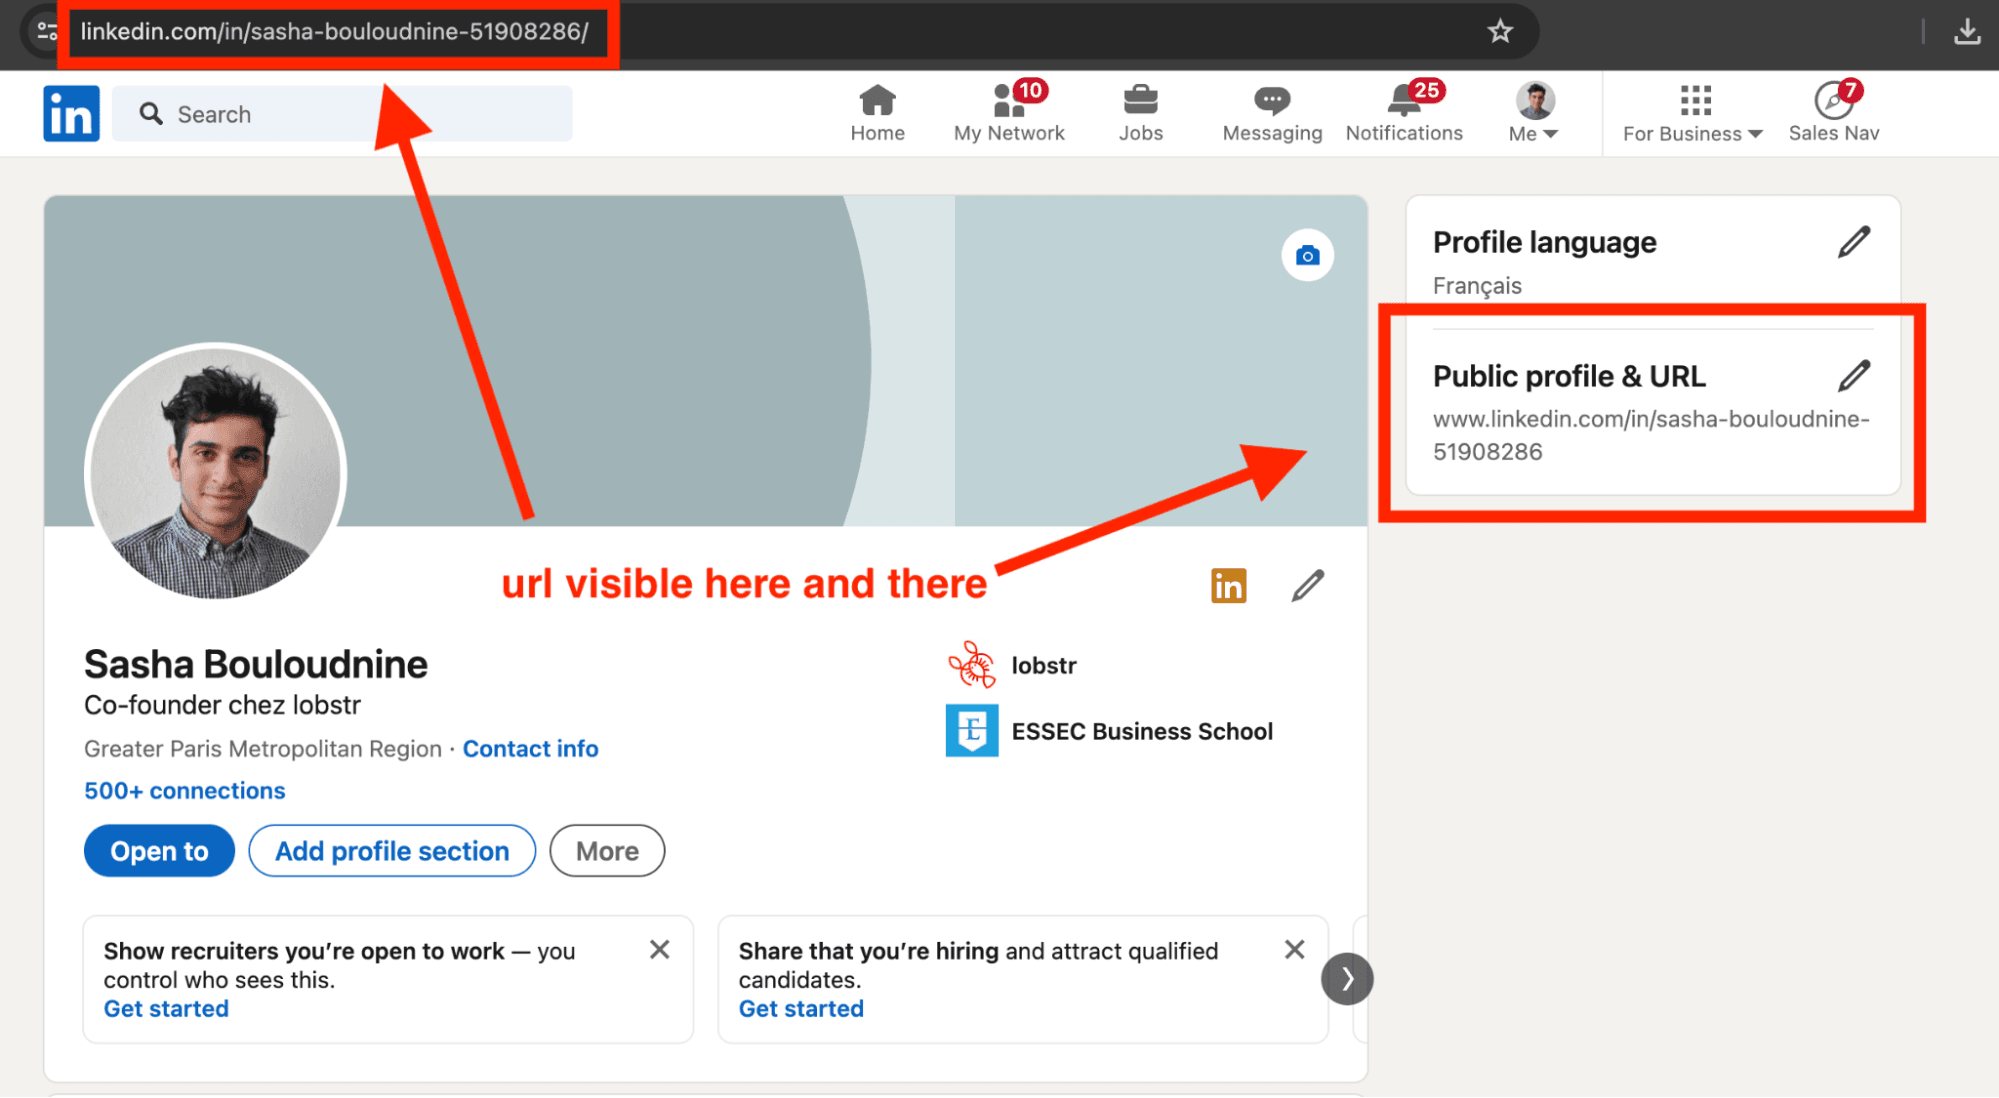 your linkedin url  visible at two places on desktop - image15.png